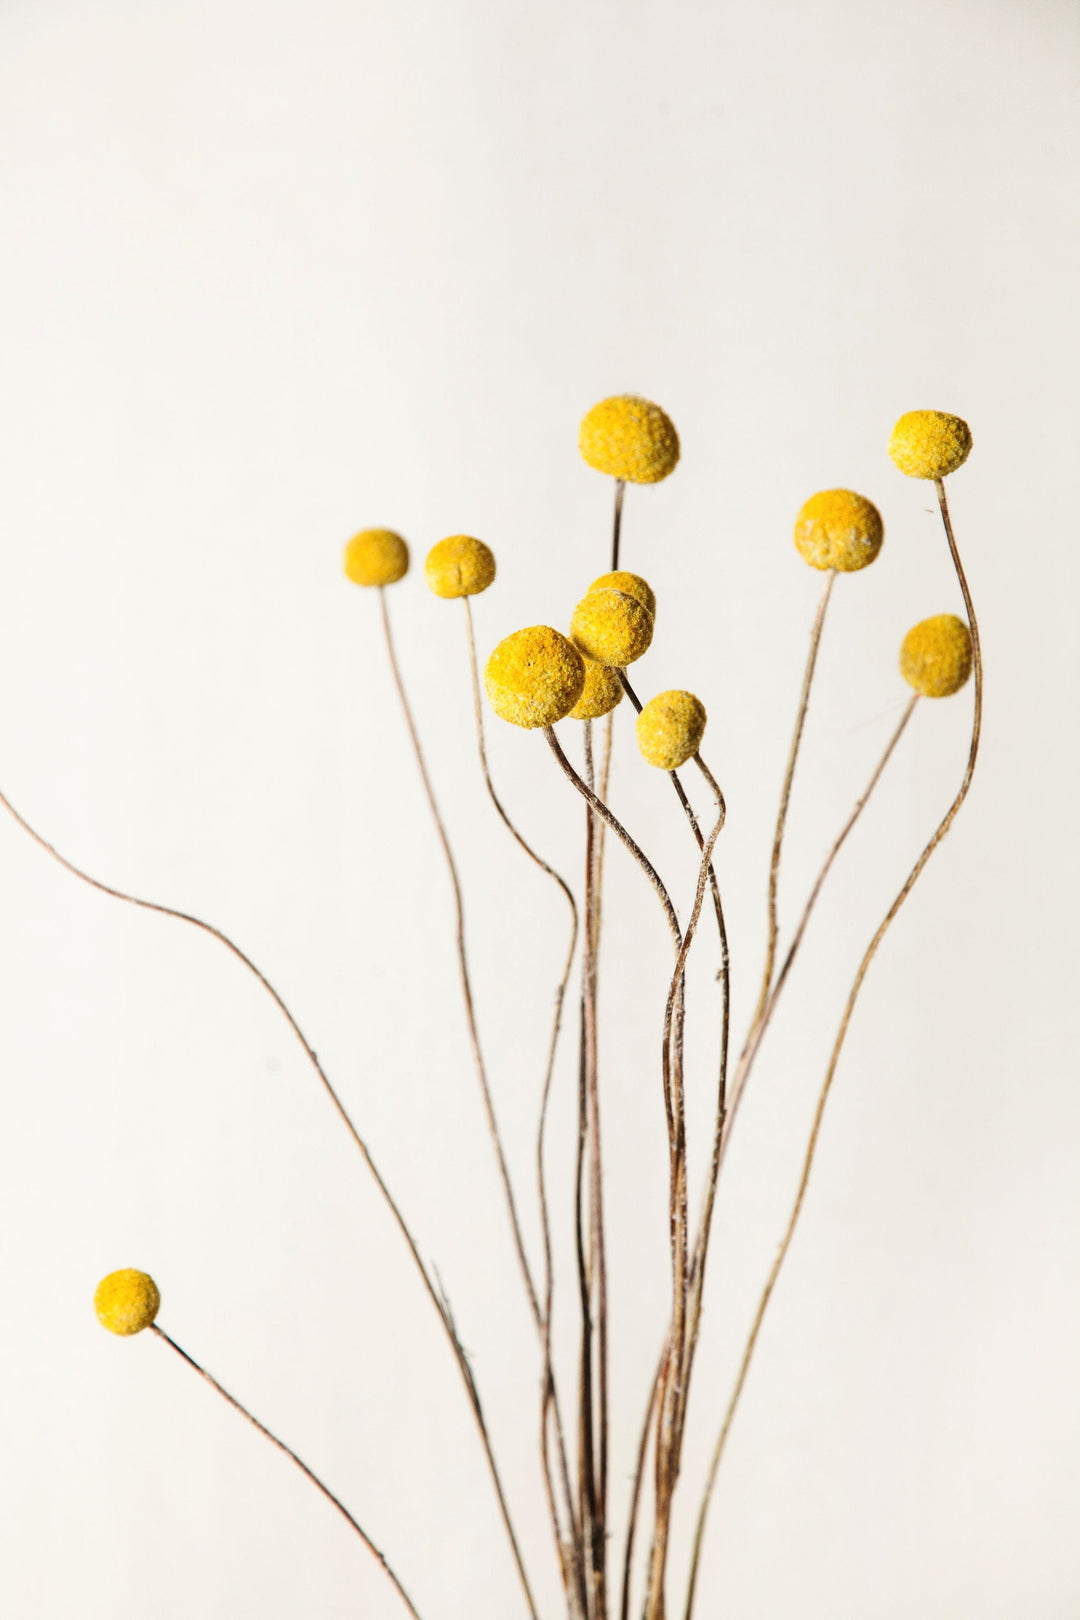 Idlewild Floral Co. Bunches Dried Yellow Billy Balls